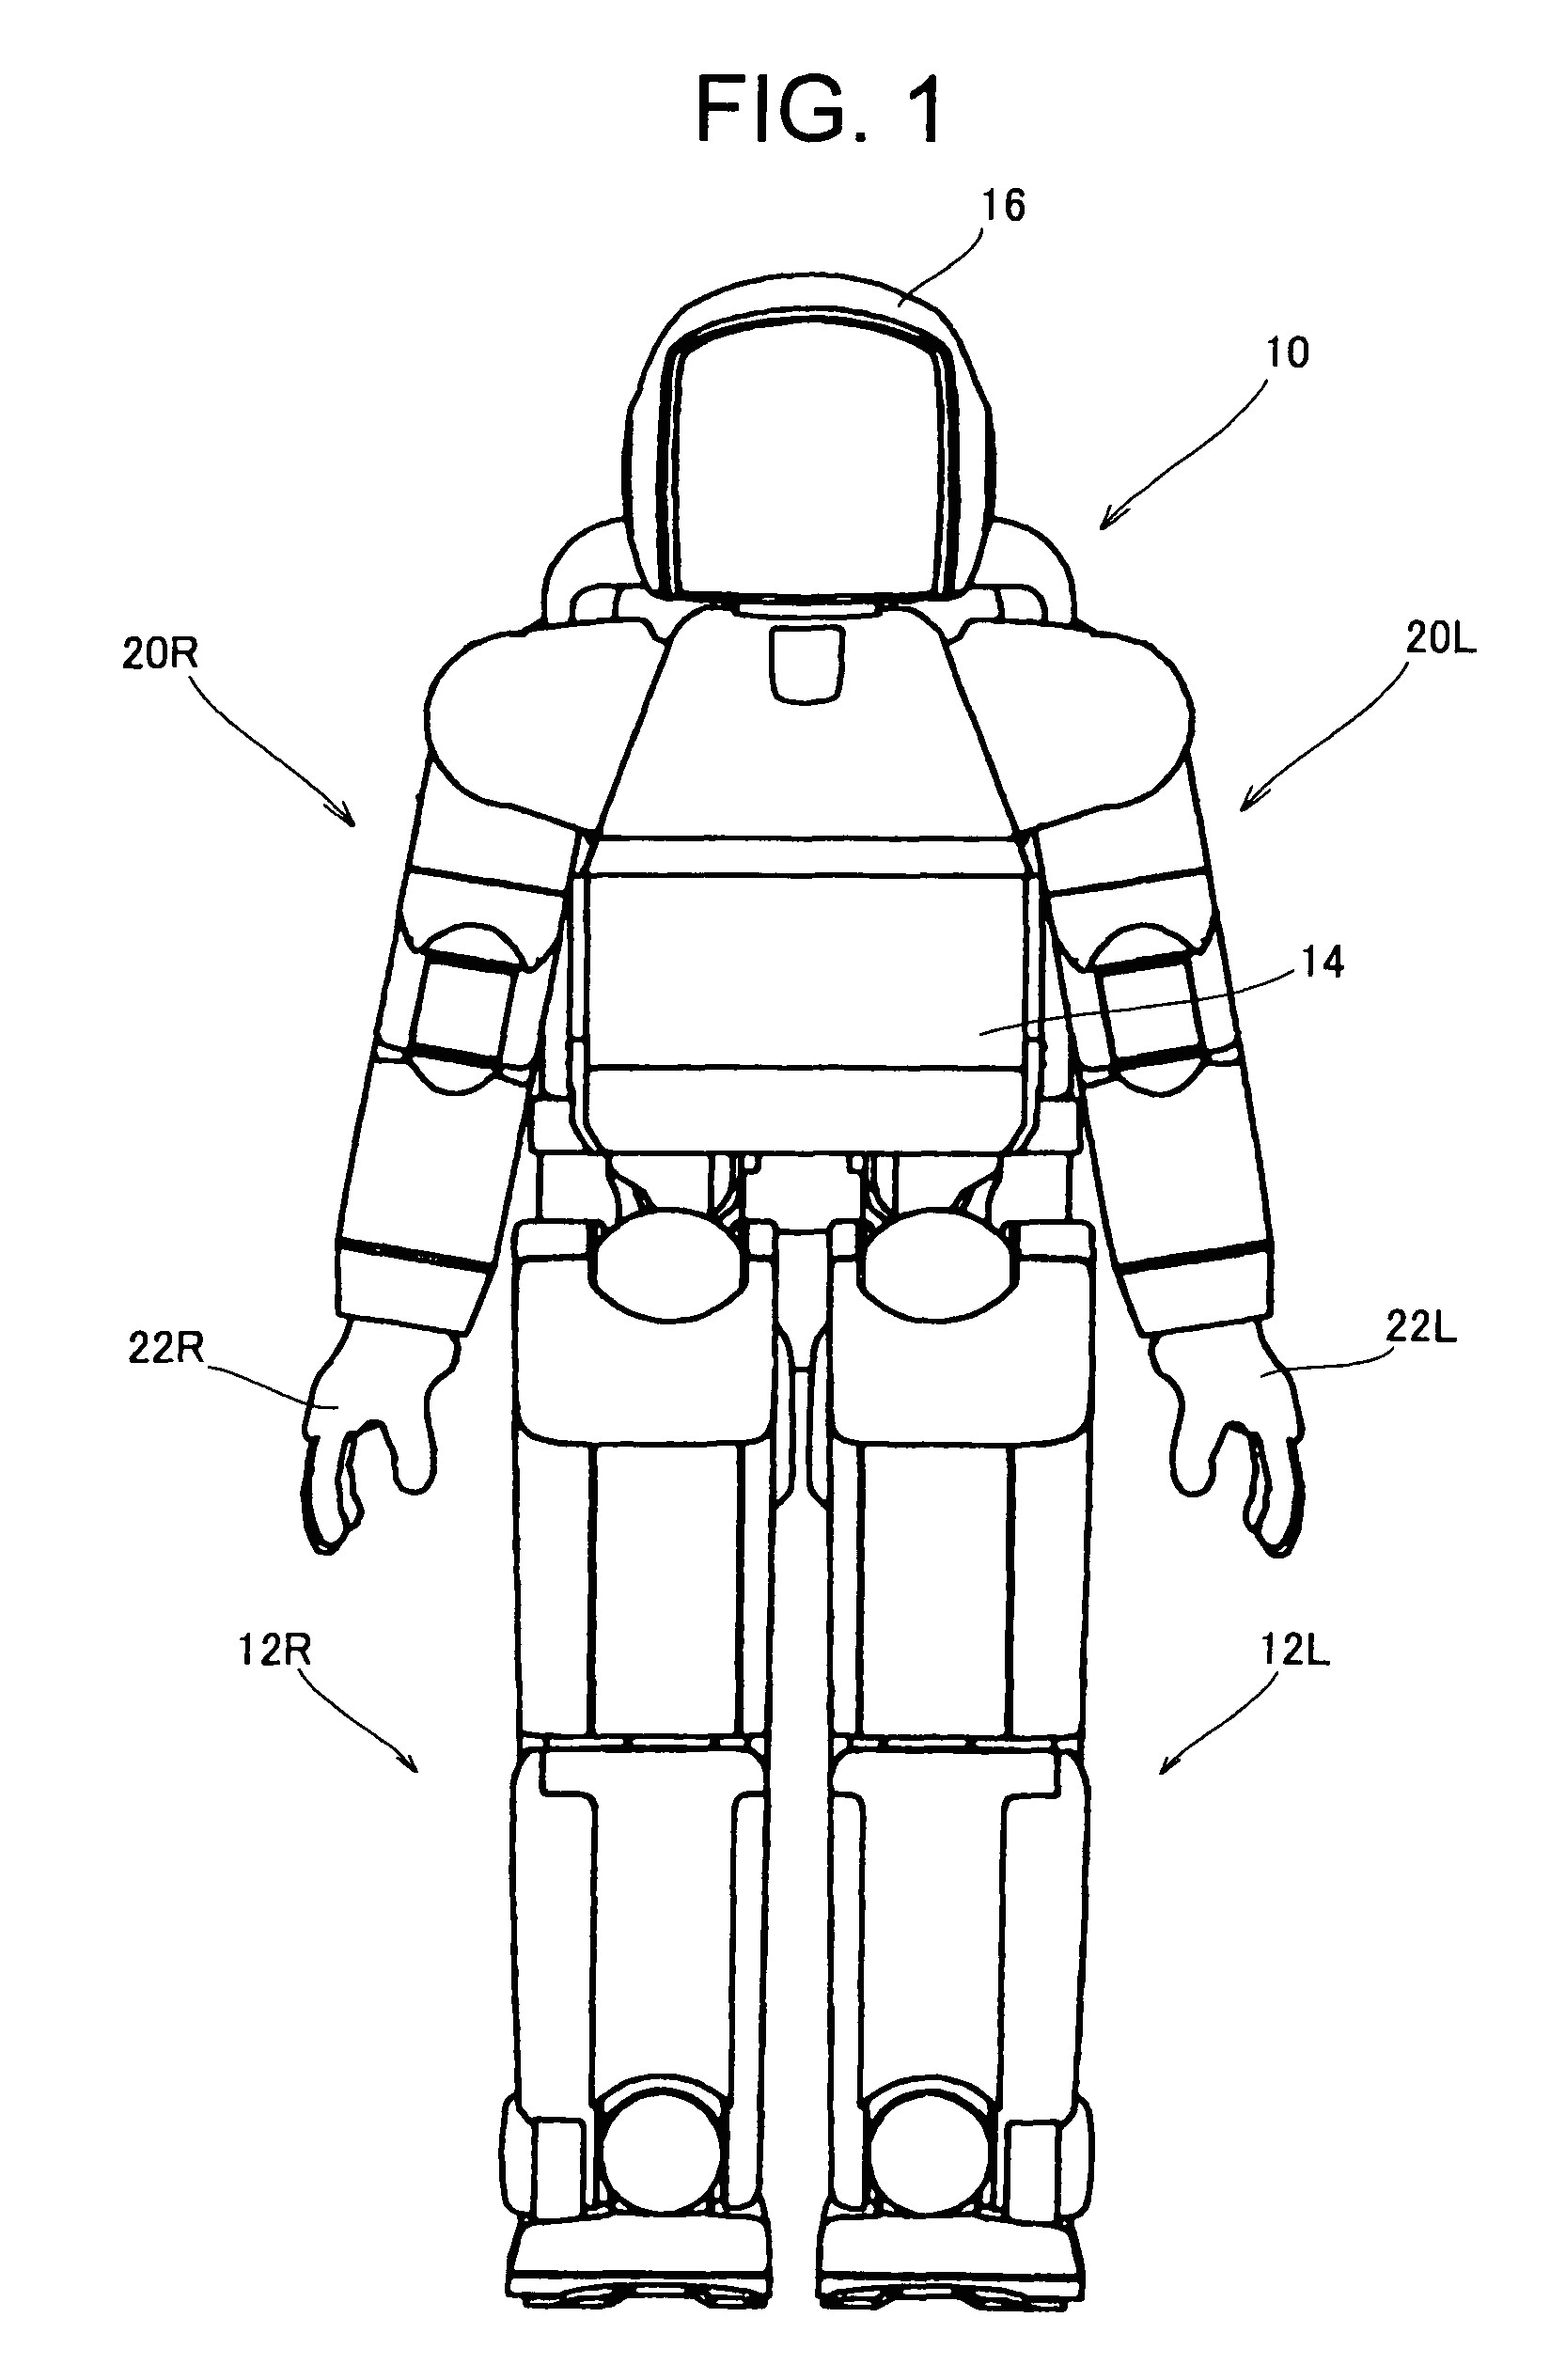 Drawings Of Robot Hands How to Draw asimo Google Search Costumes Drawings Robot